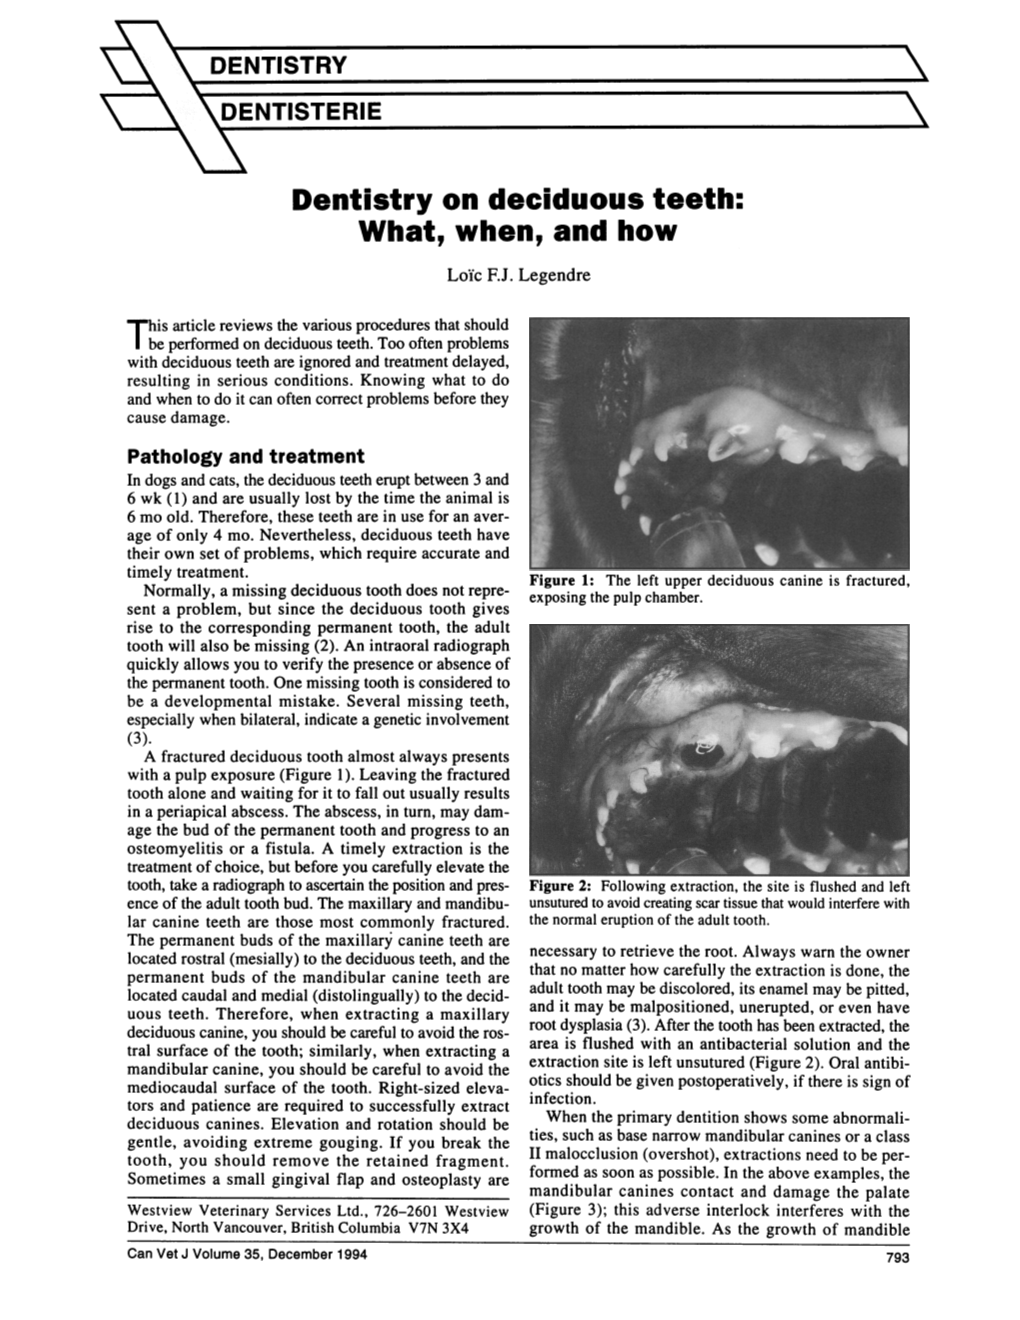 Dentistry on Deciduous Teeth: What, When, and How Loic F.J